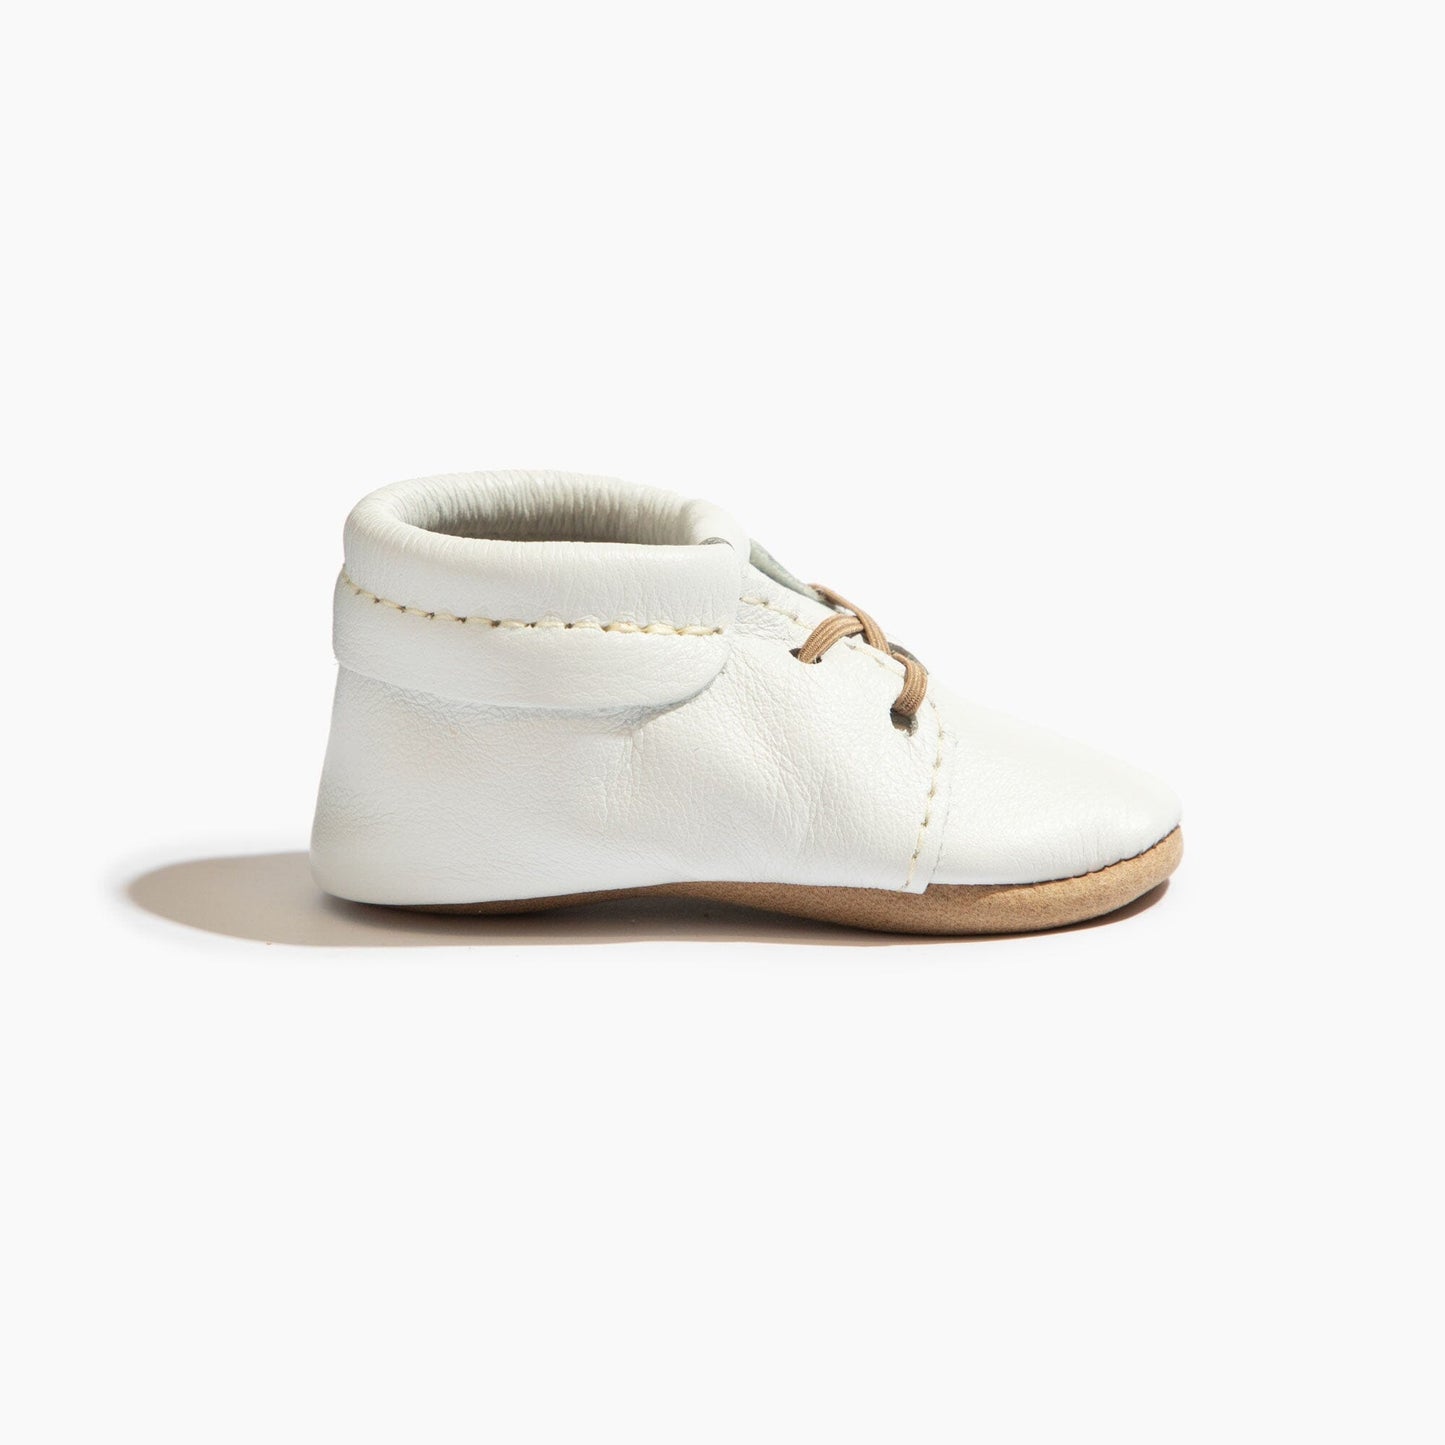 Toasted Bright White Oxford Oxford Soft Sole 